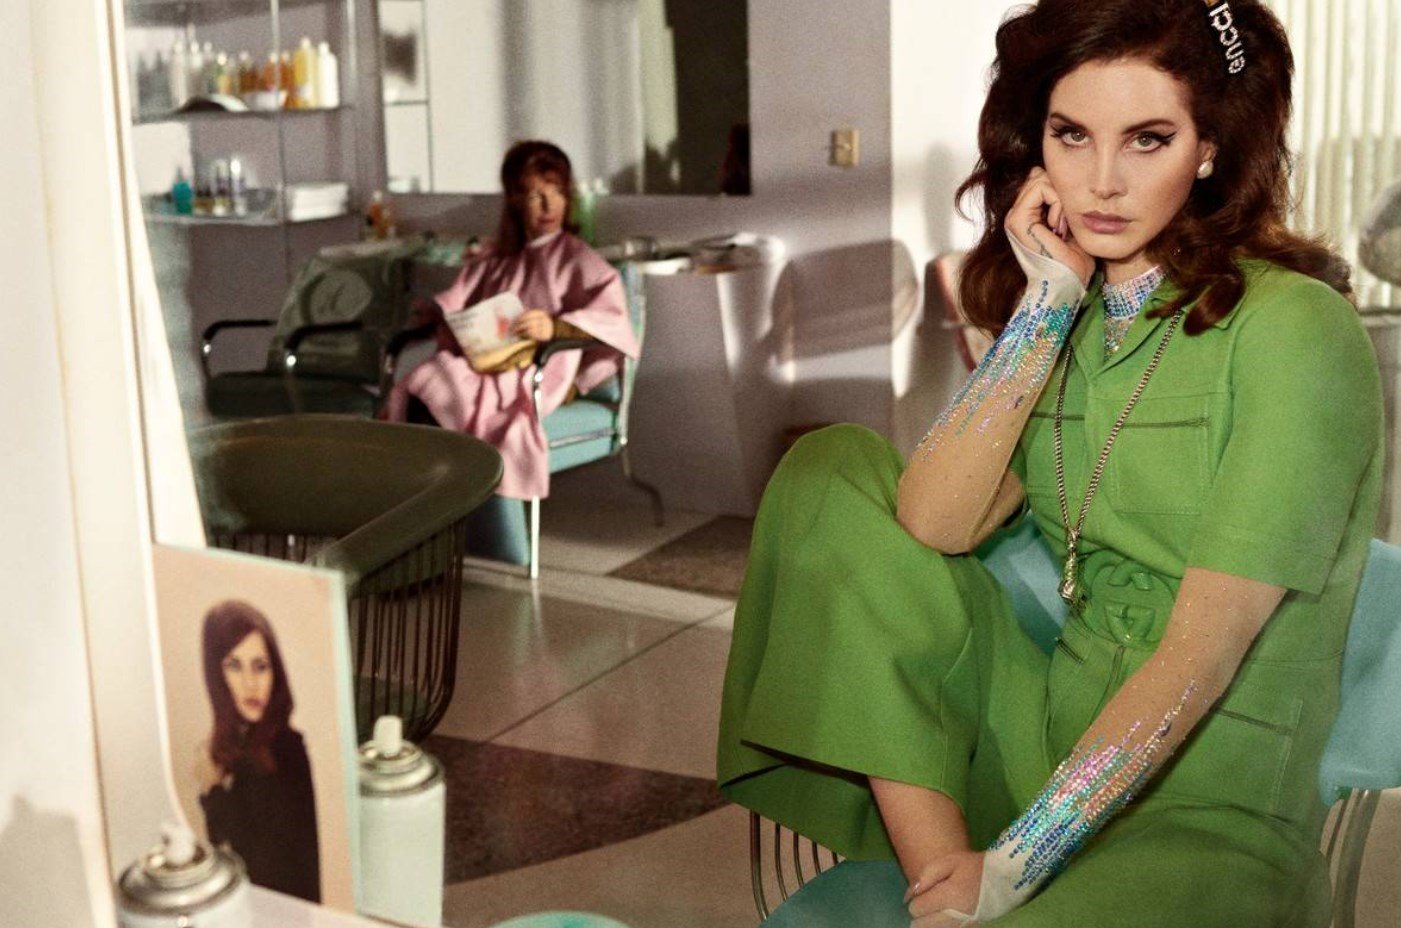 Lana Del Rey for Gucci Guilty.